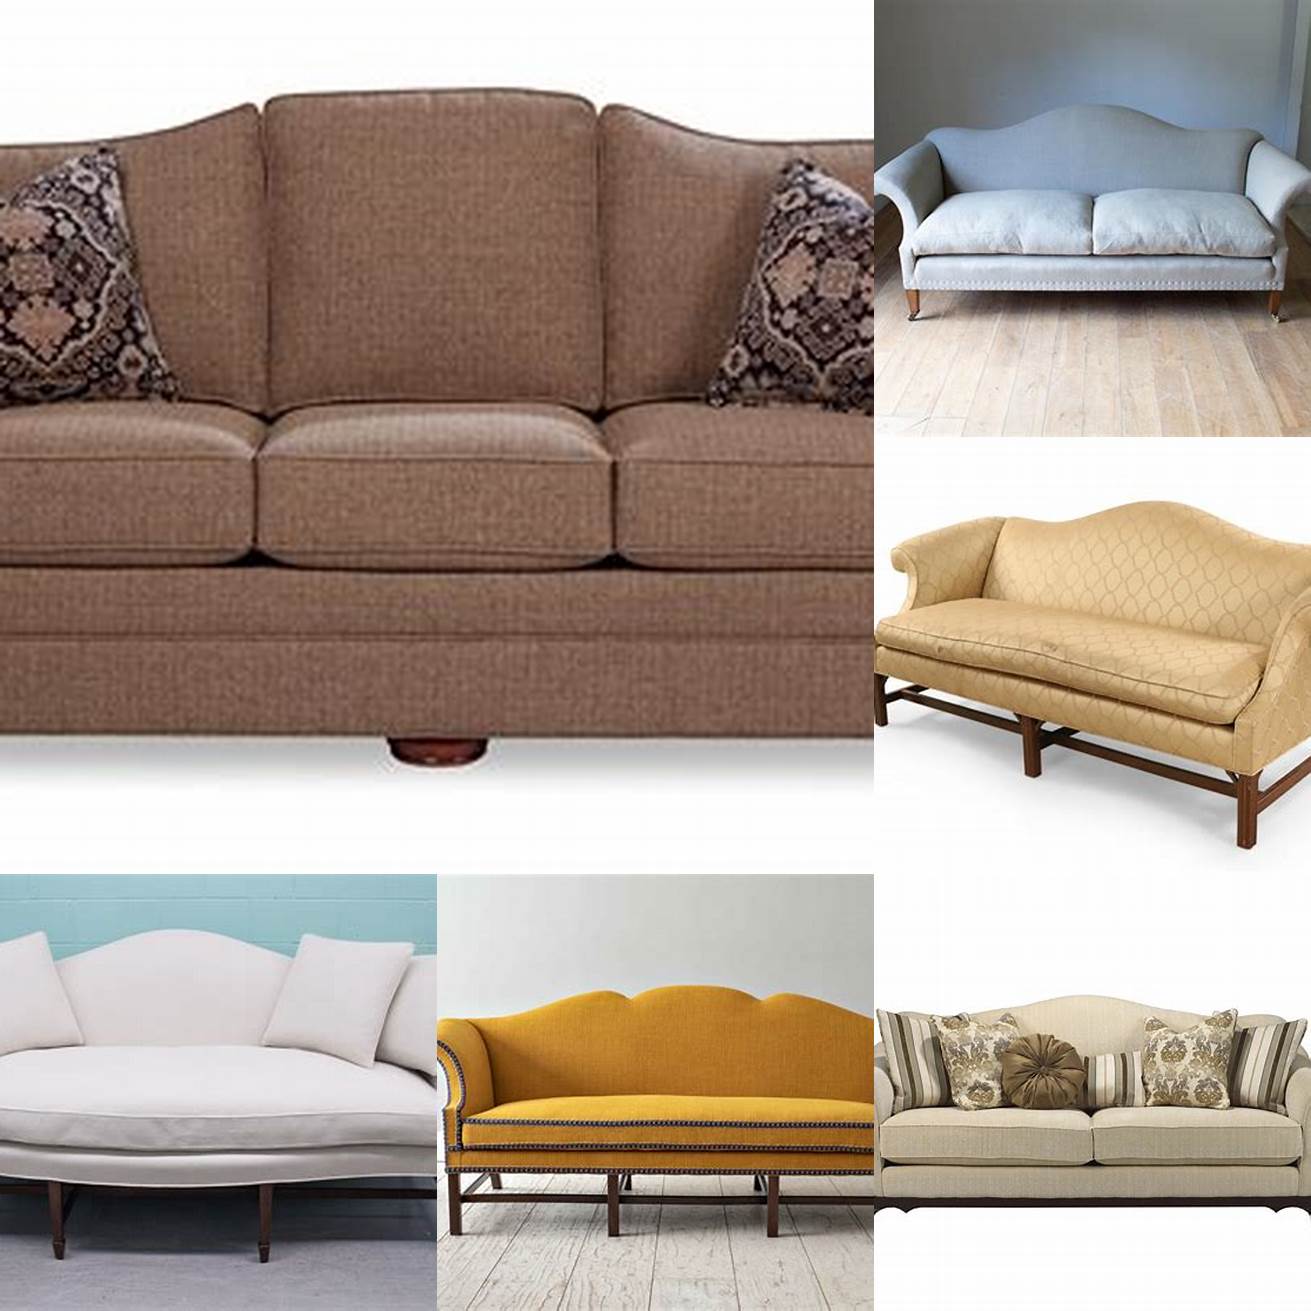 1 Consider the size and scale of your room before purchasing a Camel Back Sofa